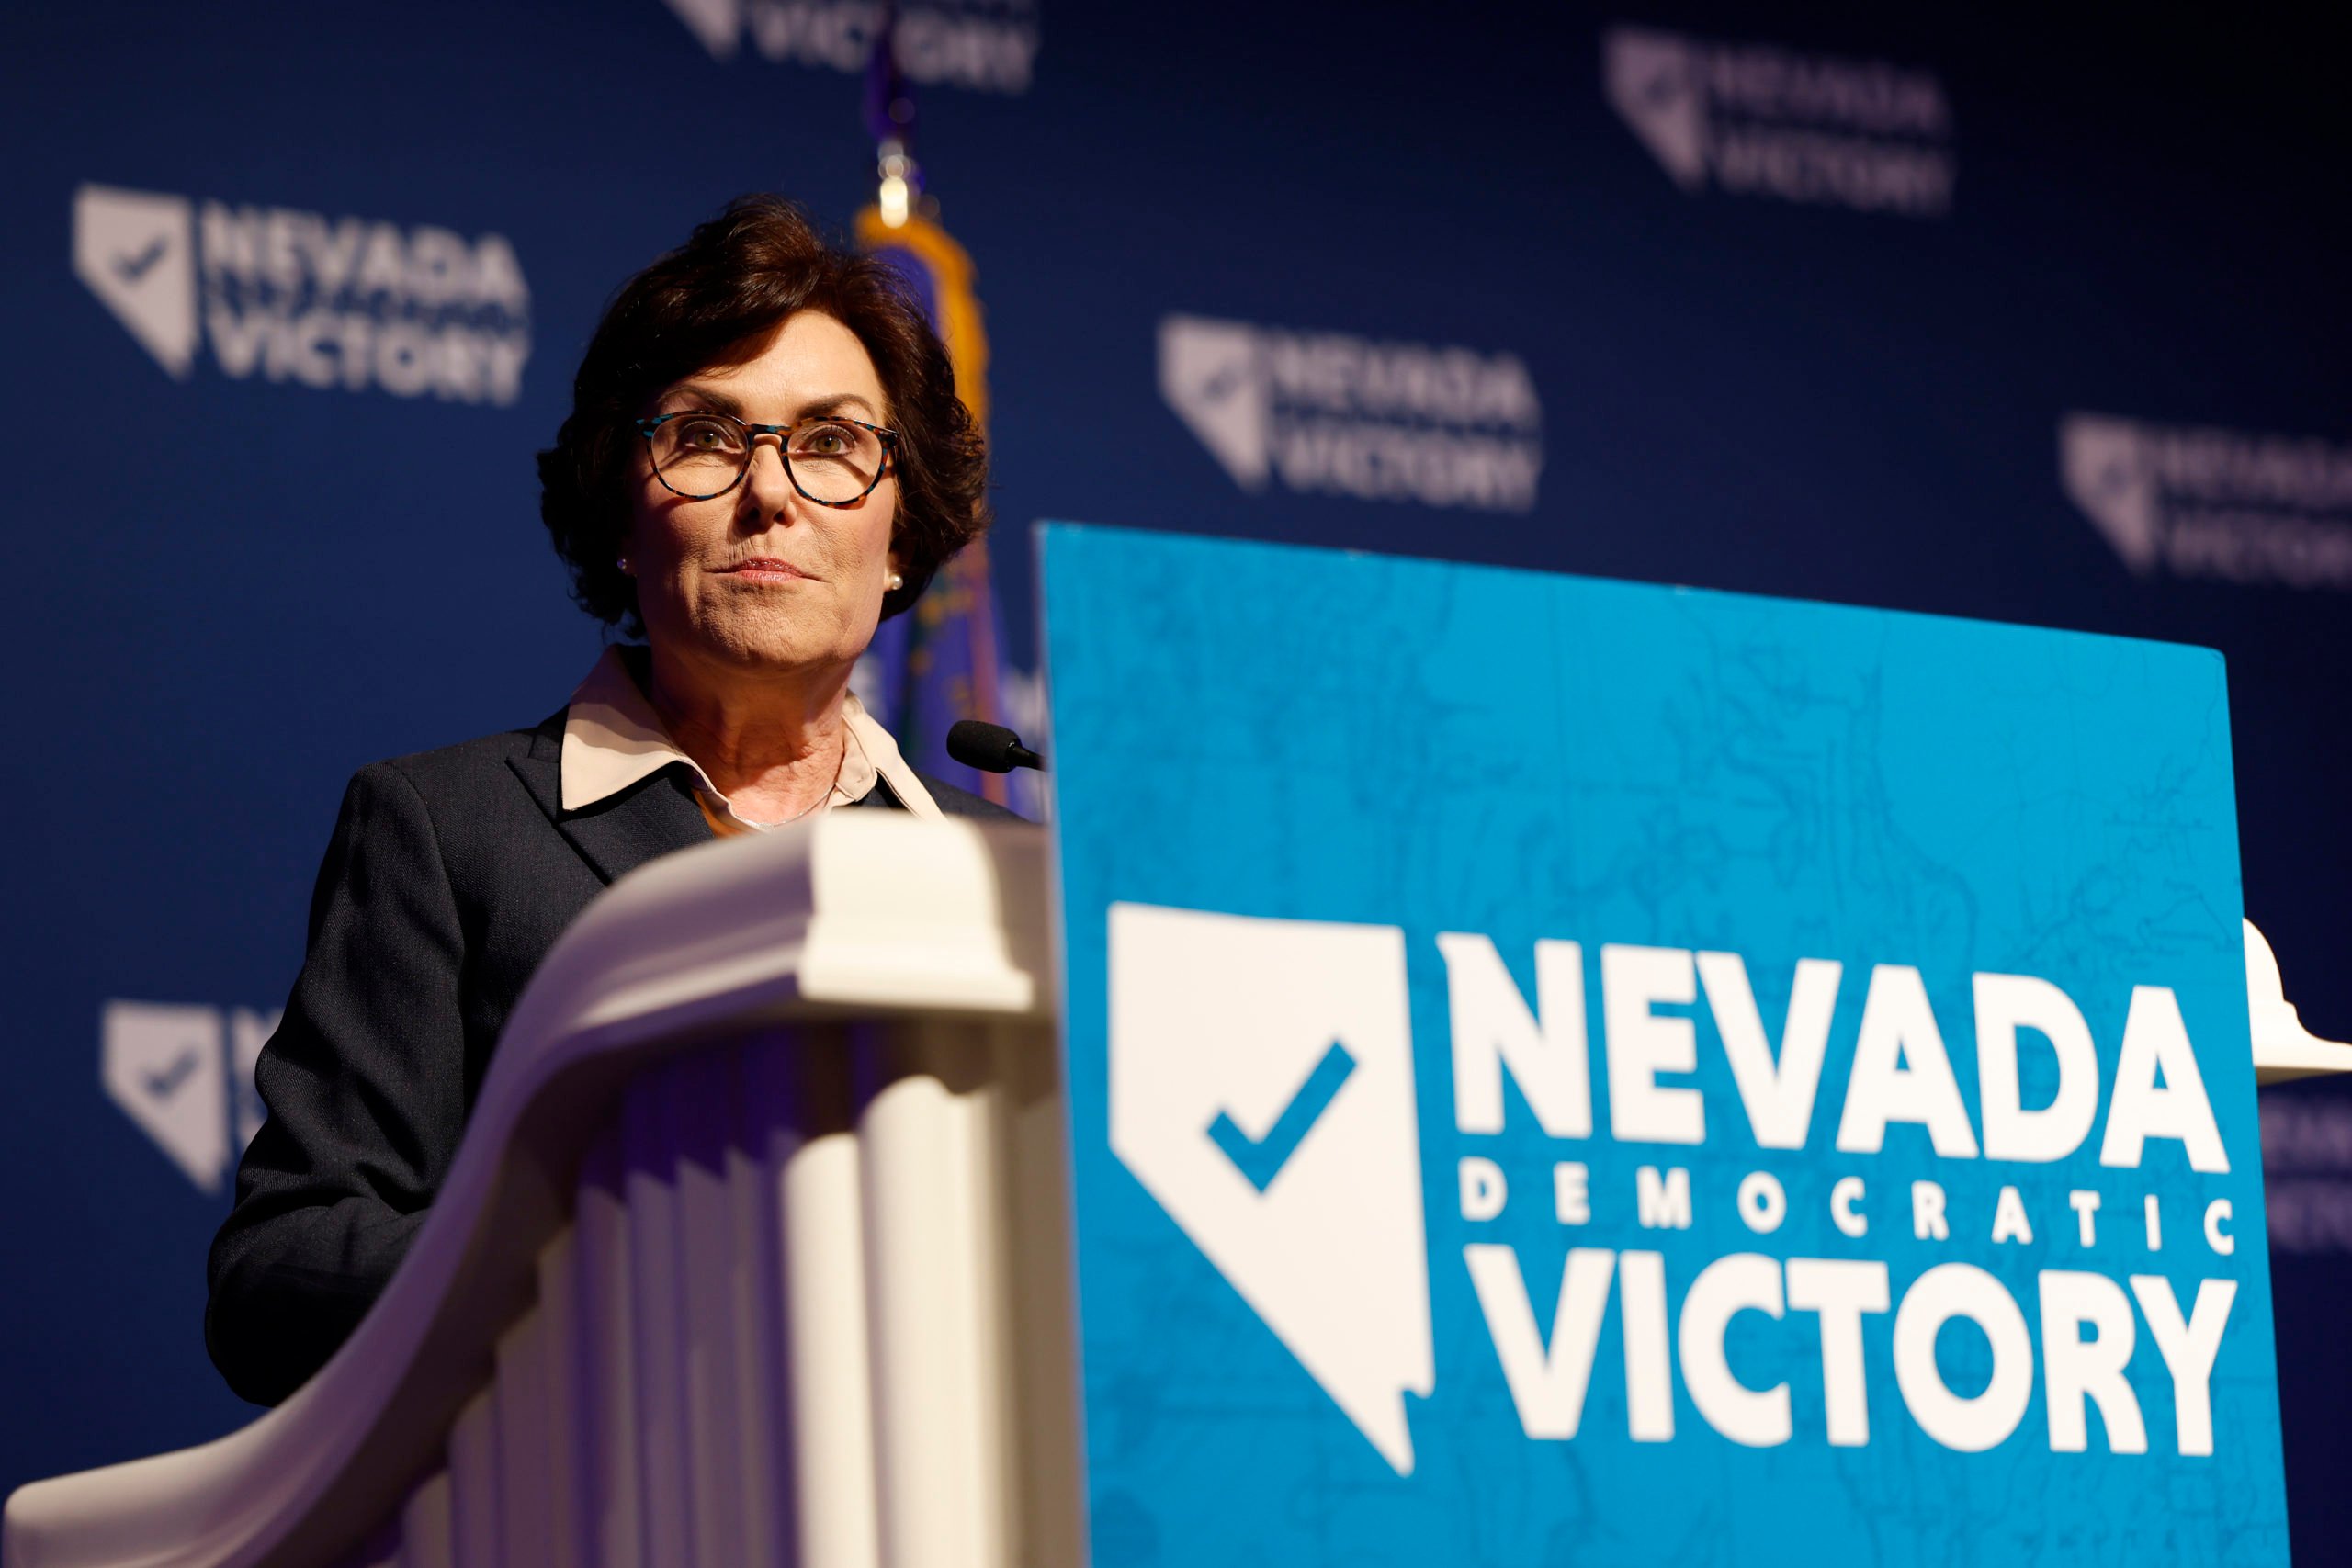 LAS VEGAS, NEVADA - NOVEMBER 08: U.S. Sen. Jacky Rosen (D-NV) gives remarks at an election night party hosted by Nevada Democratic Victory at The Encore on November 08, 2022 in Las Vegas, Nevada. Supporters and candidates gathered to await the results for several key races in the state of Nevada including the Gubernatorial and Senate race. (Photo by Anna Moneymaker/Getty Images)